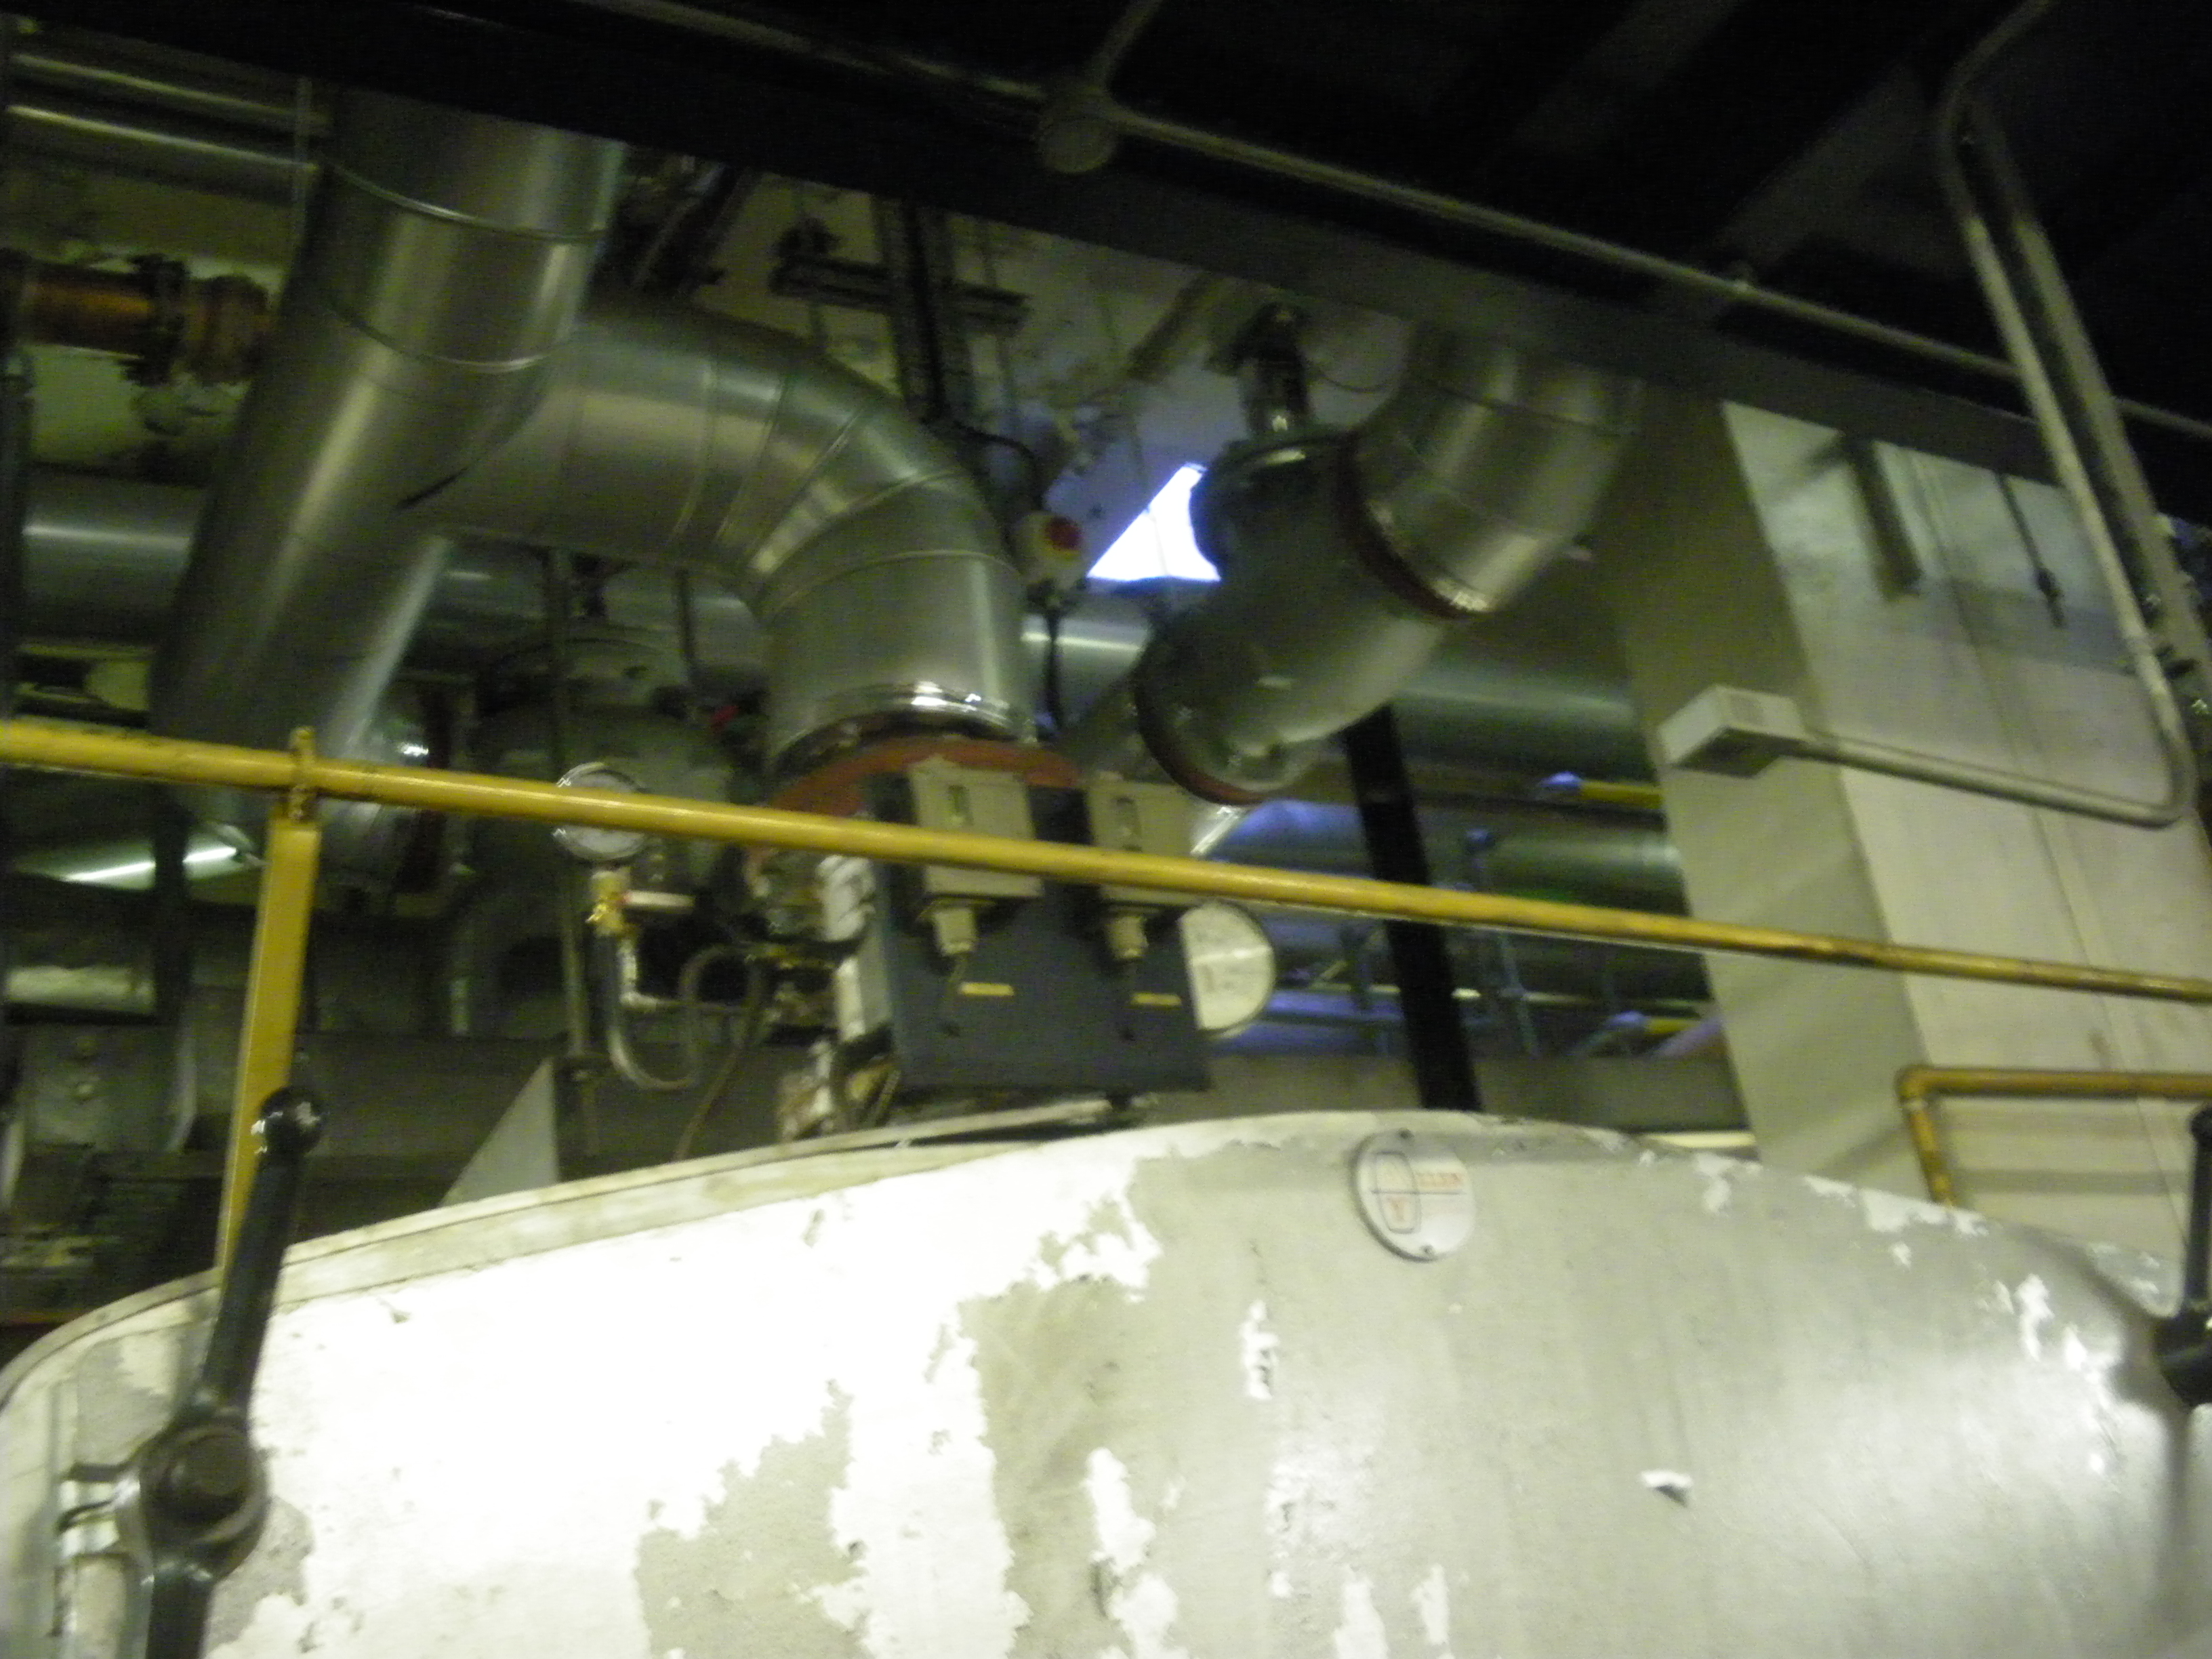 Above one of the two 1980s gas-fired boilers